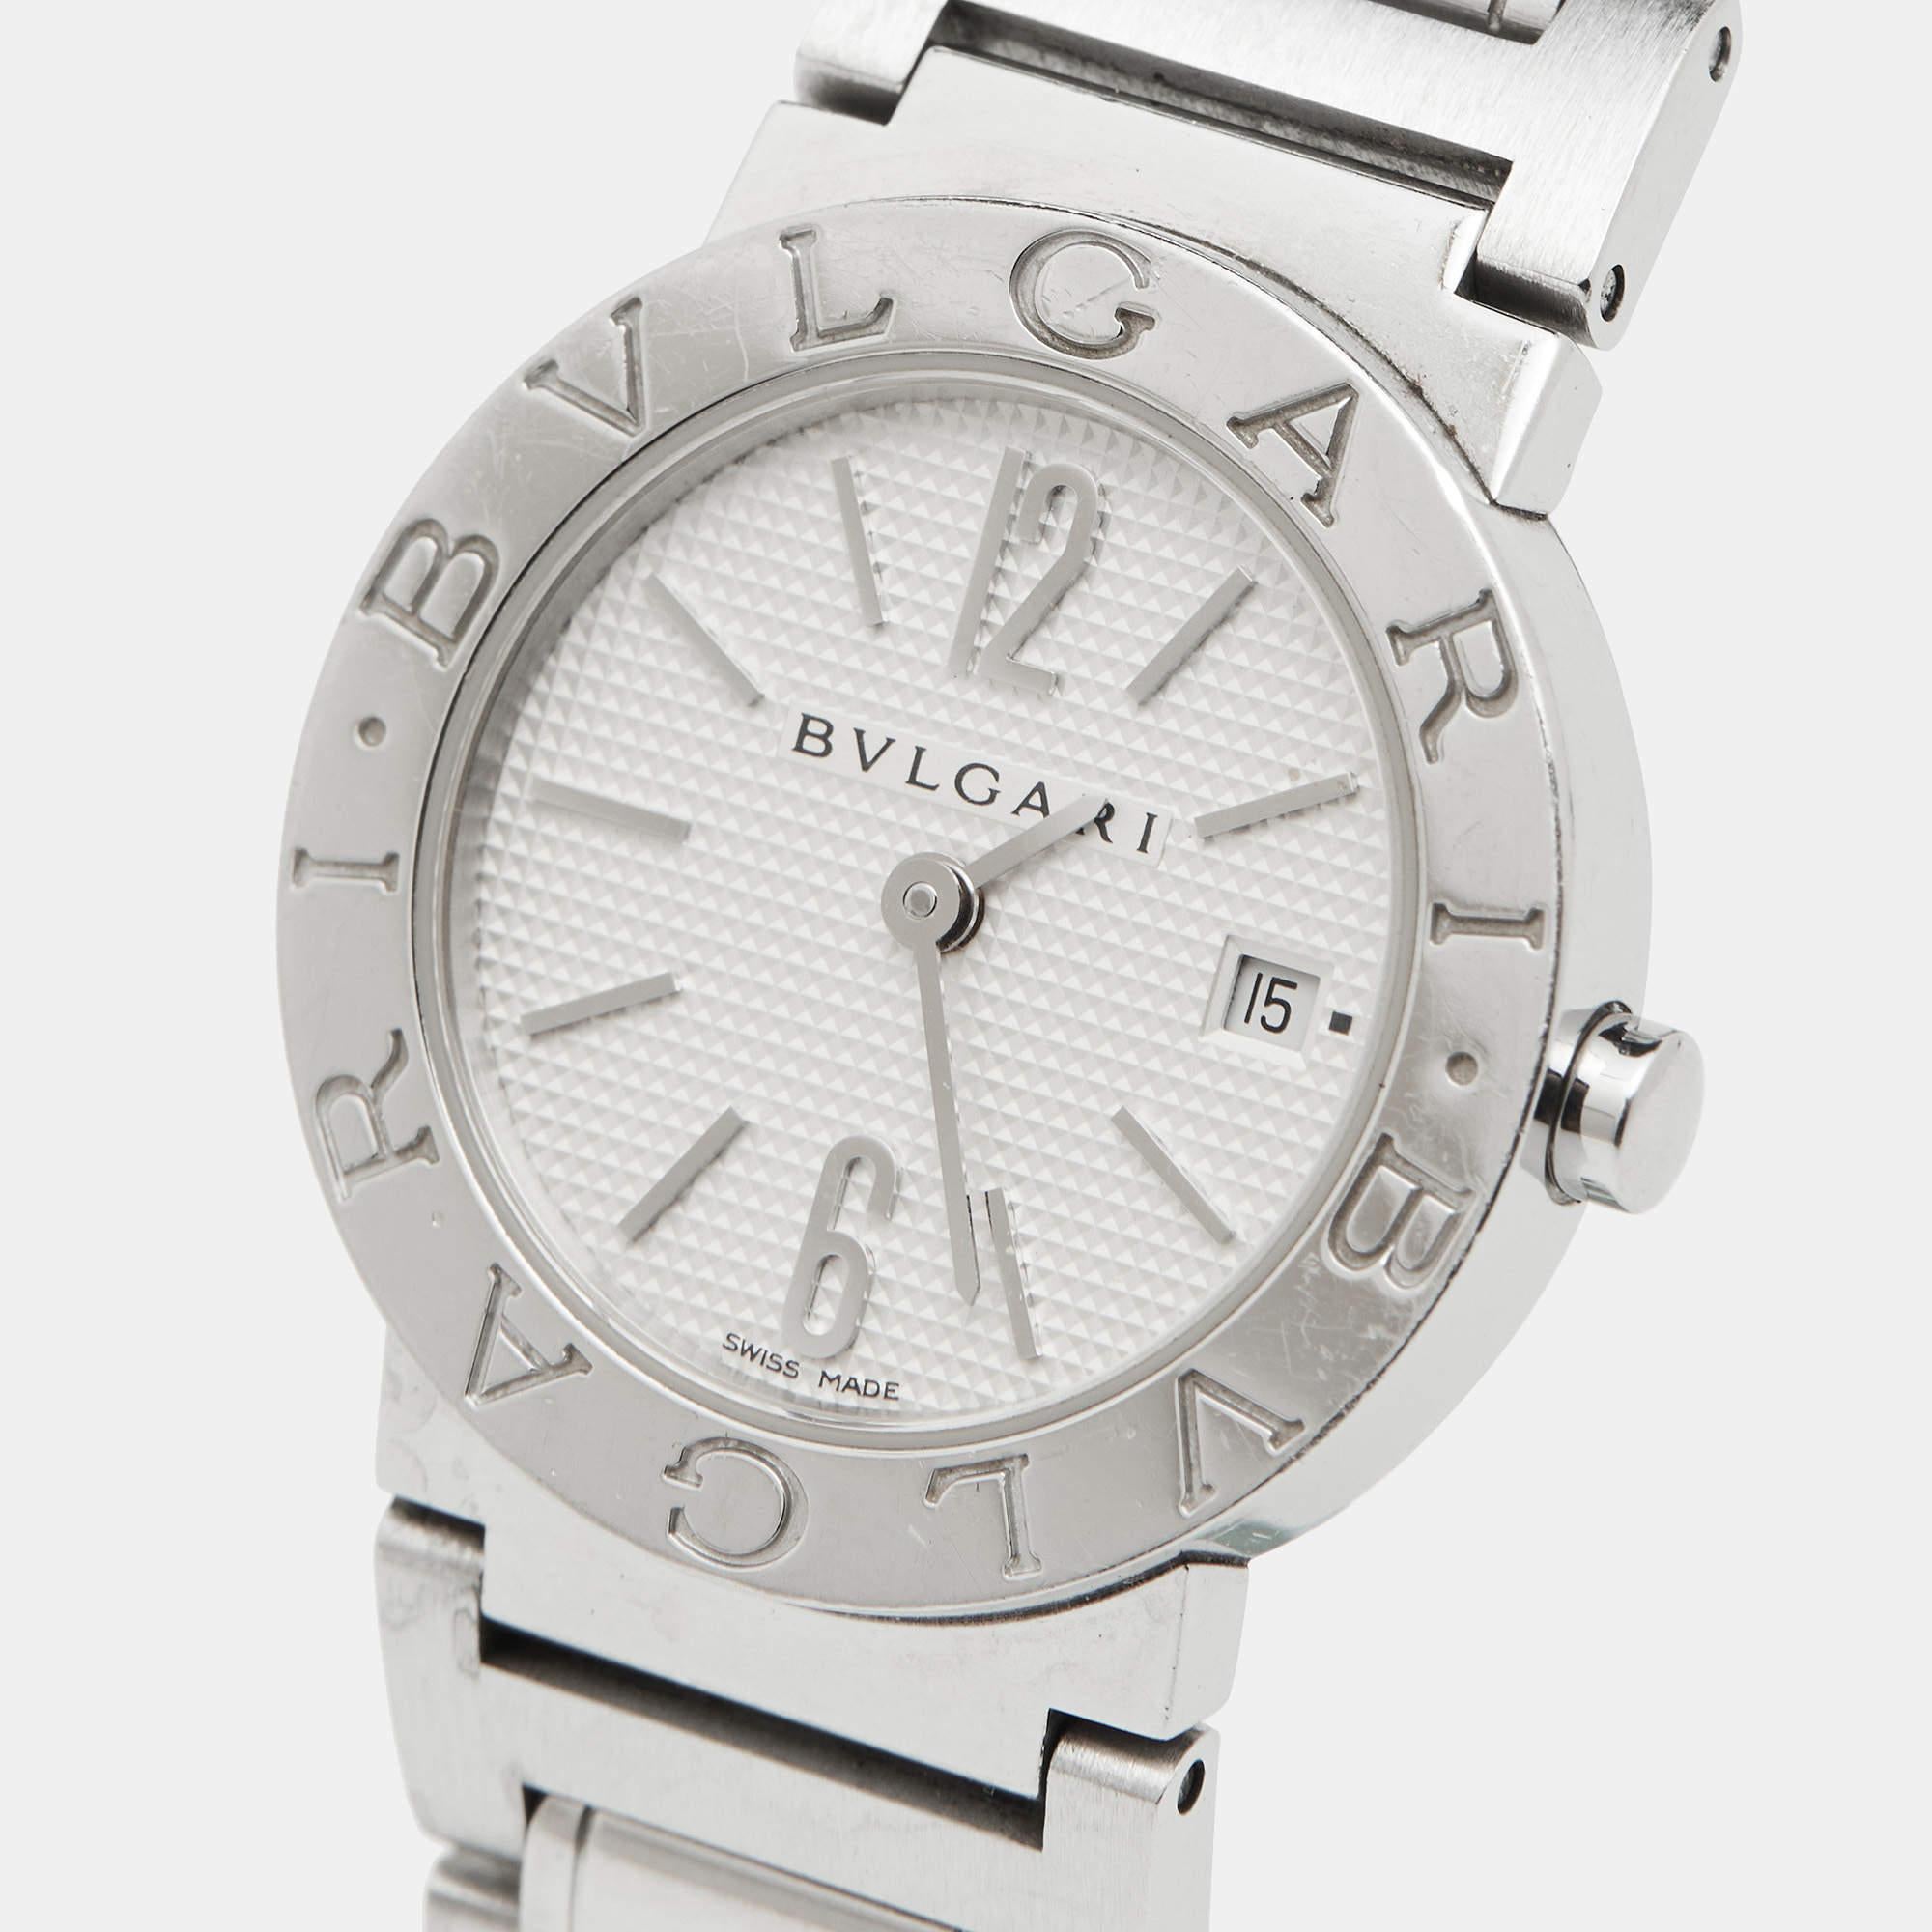 A timeless silhouette made of high-quality materials and packed with precision and luxury makes this Bvlgari women's wristwatch the perfect choice for a sophisticated finish to any look. It is a grand creation to elevate the everyday experience.

